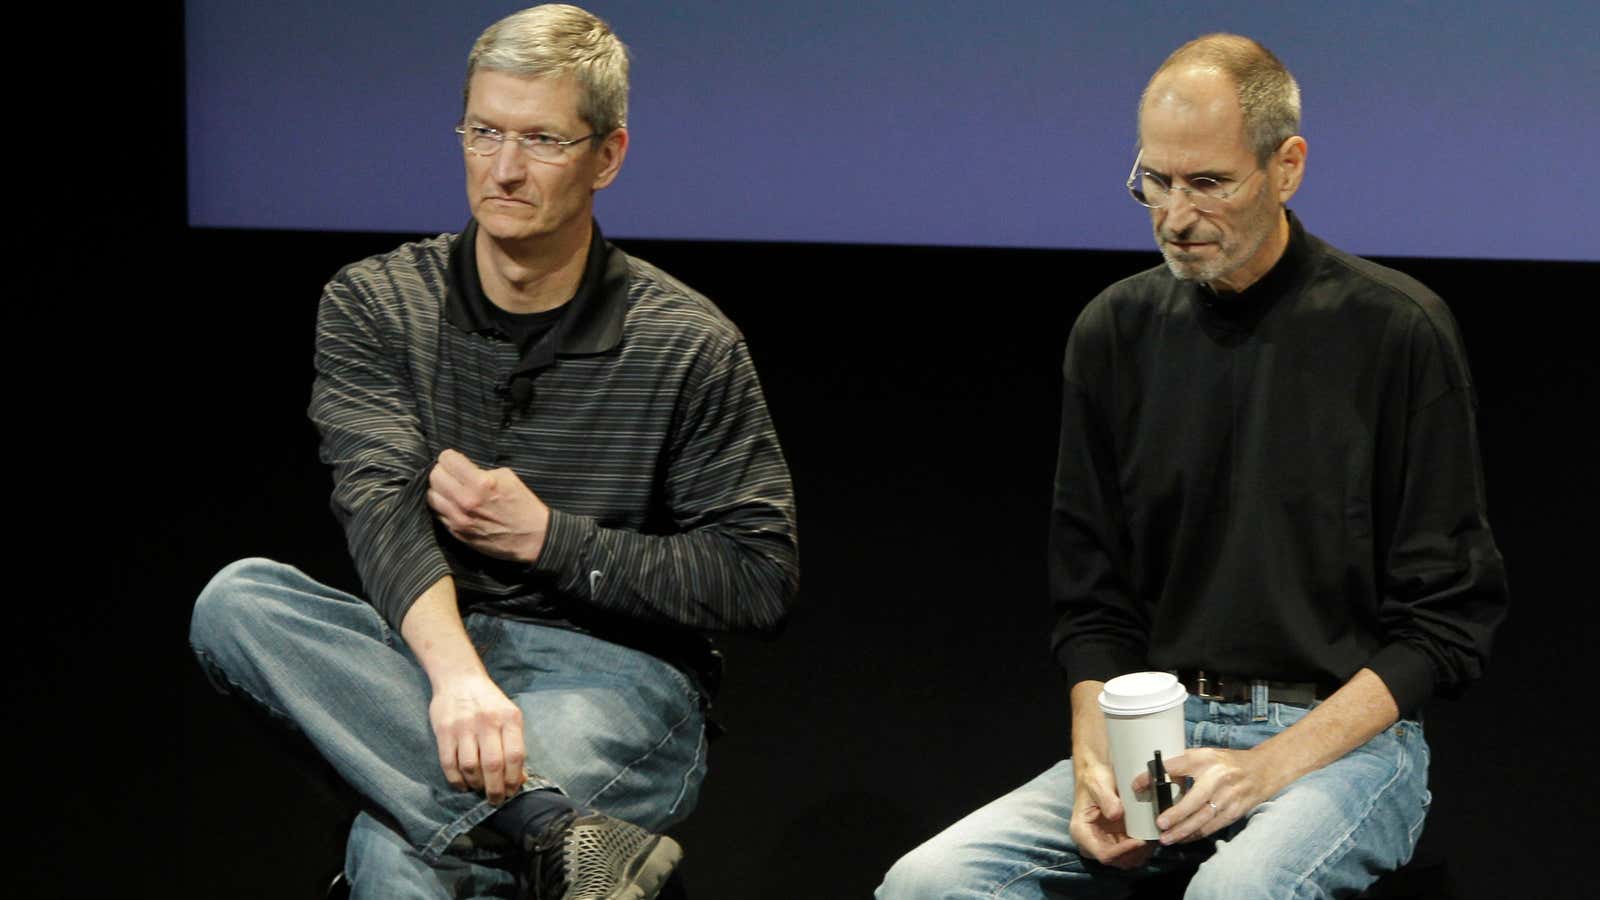 You can see how different Cook is from Jobs. Just look at that sweater.